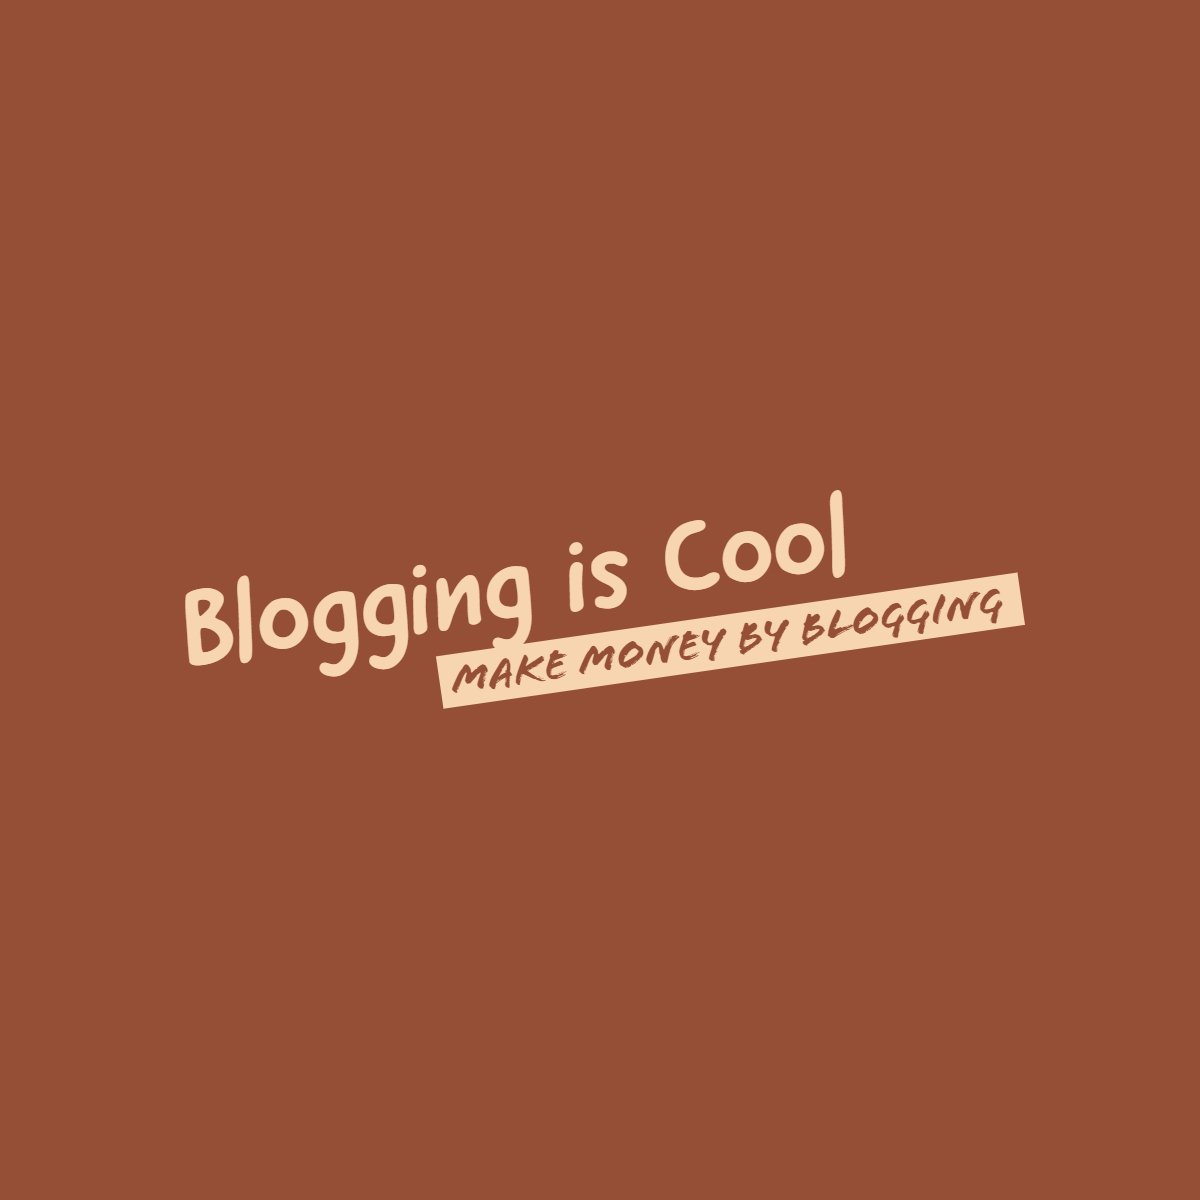 Bloggingiscool.com What are the best ways to promote a blog post effectively